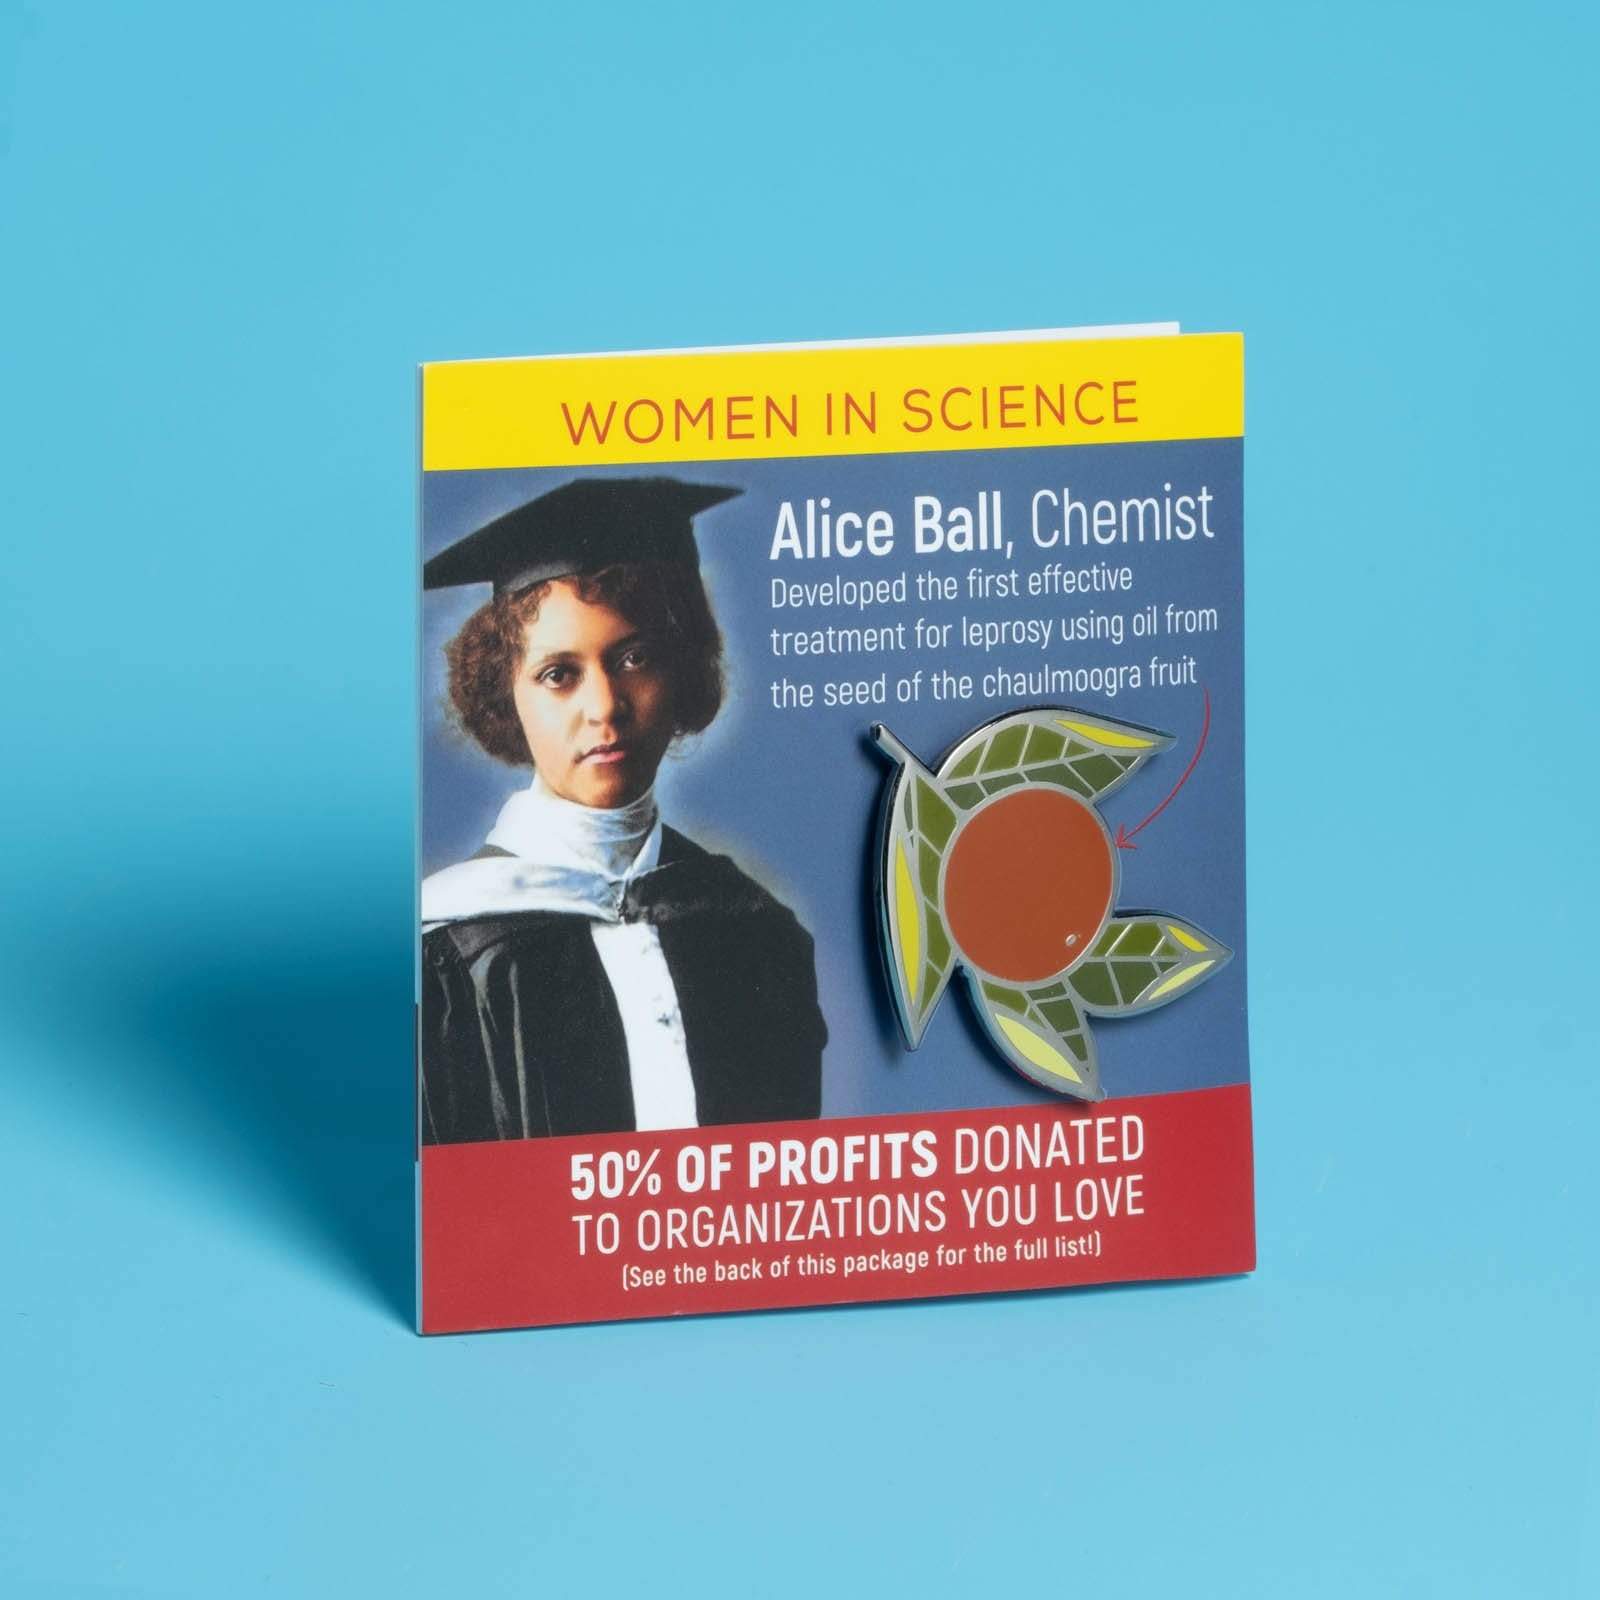 Women in Science Pin Set - get all 4 pins!